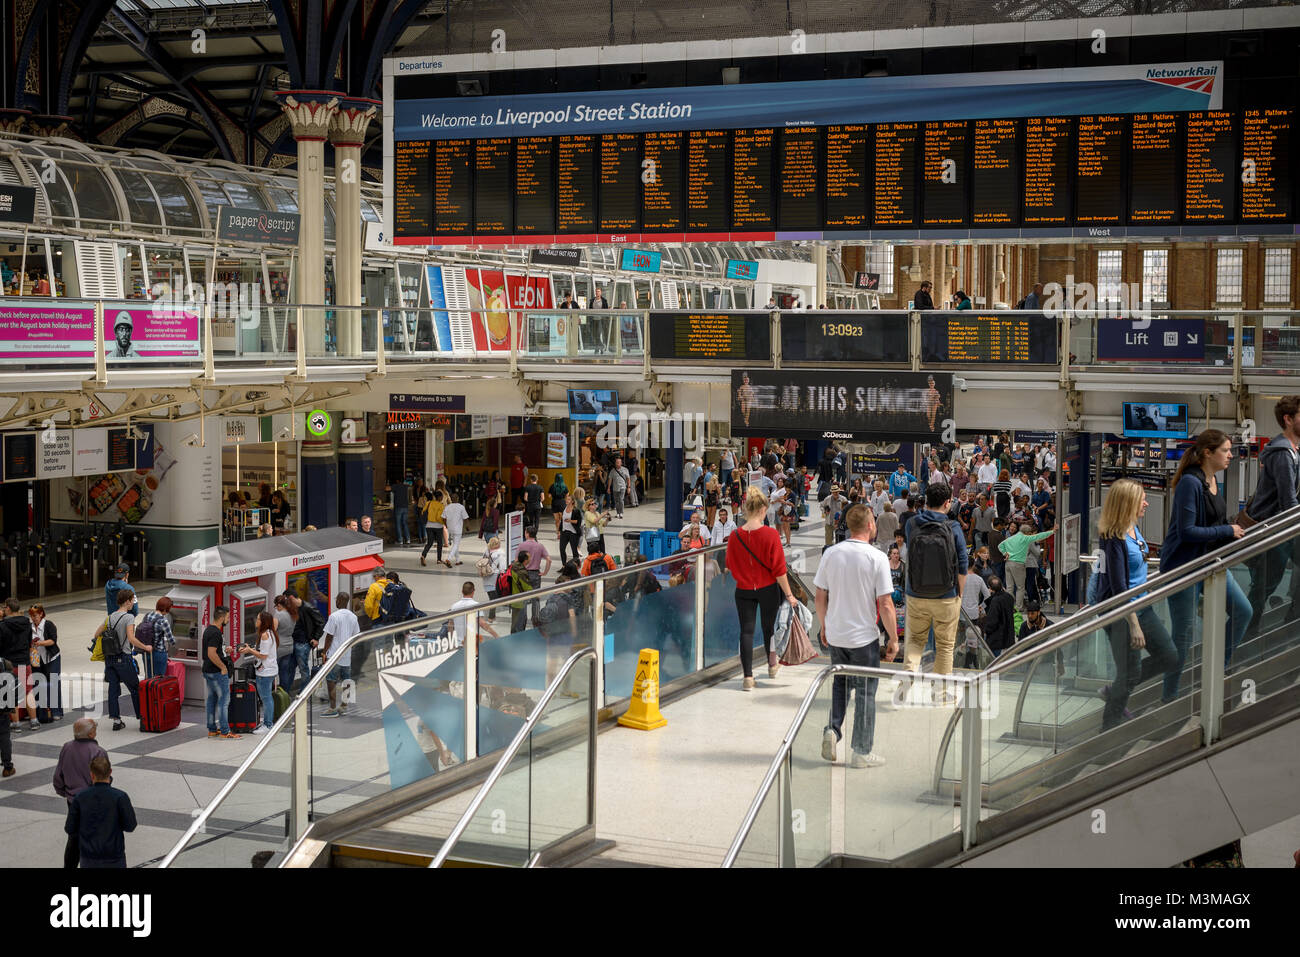 London (UK) - August 2017. Travelers and commuters in the Liverpool Street Station concourse. Stock Photo